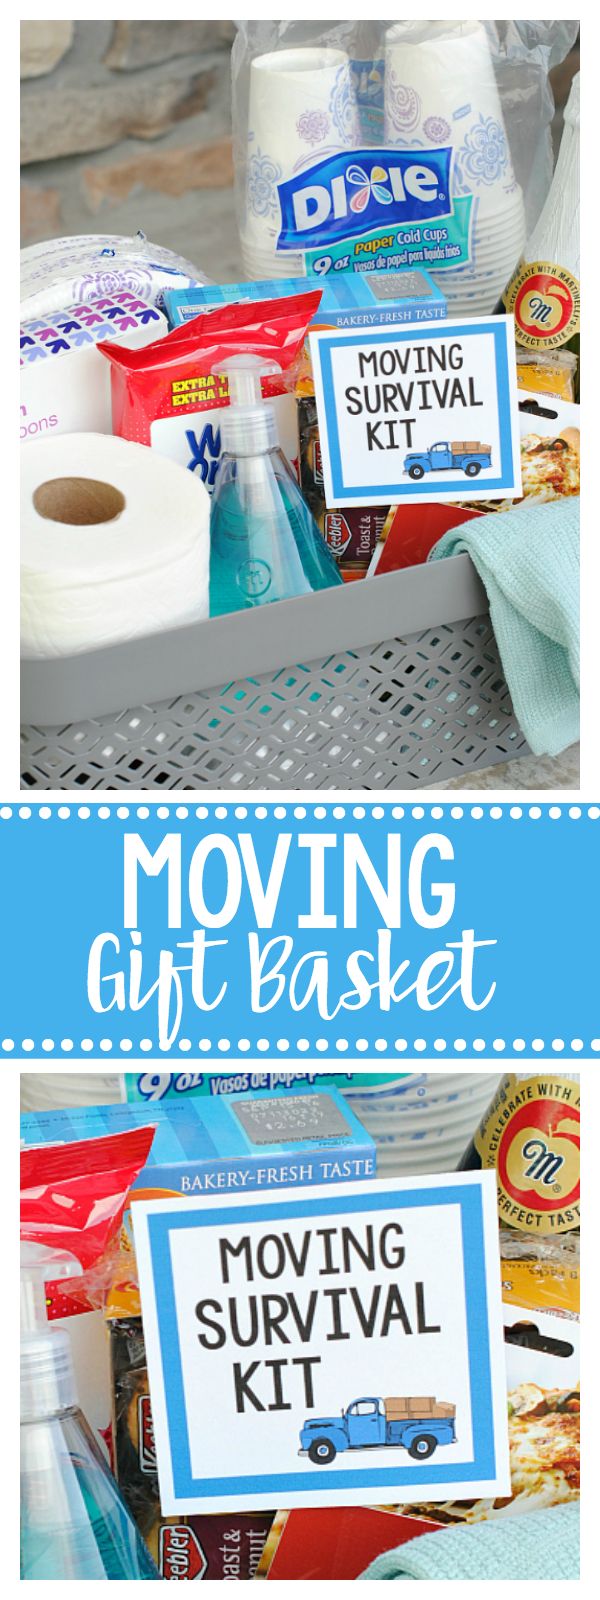 Moving can be so stressful! This gift basket is a perfect way to brighten someon...